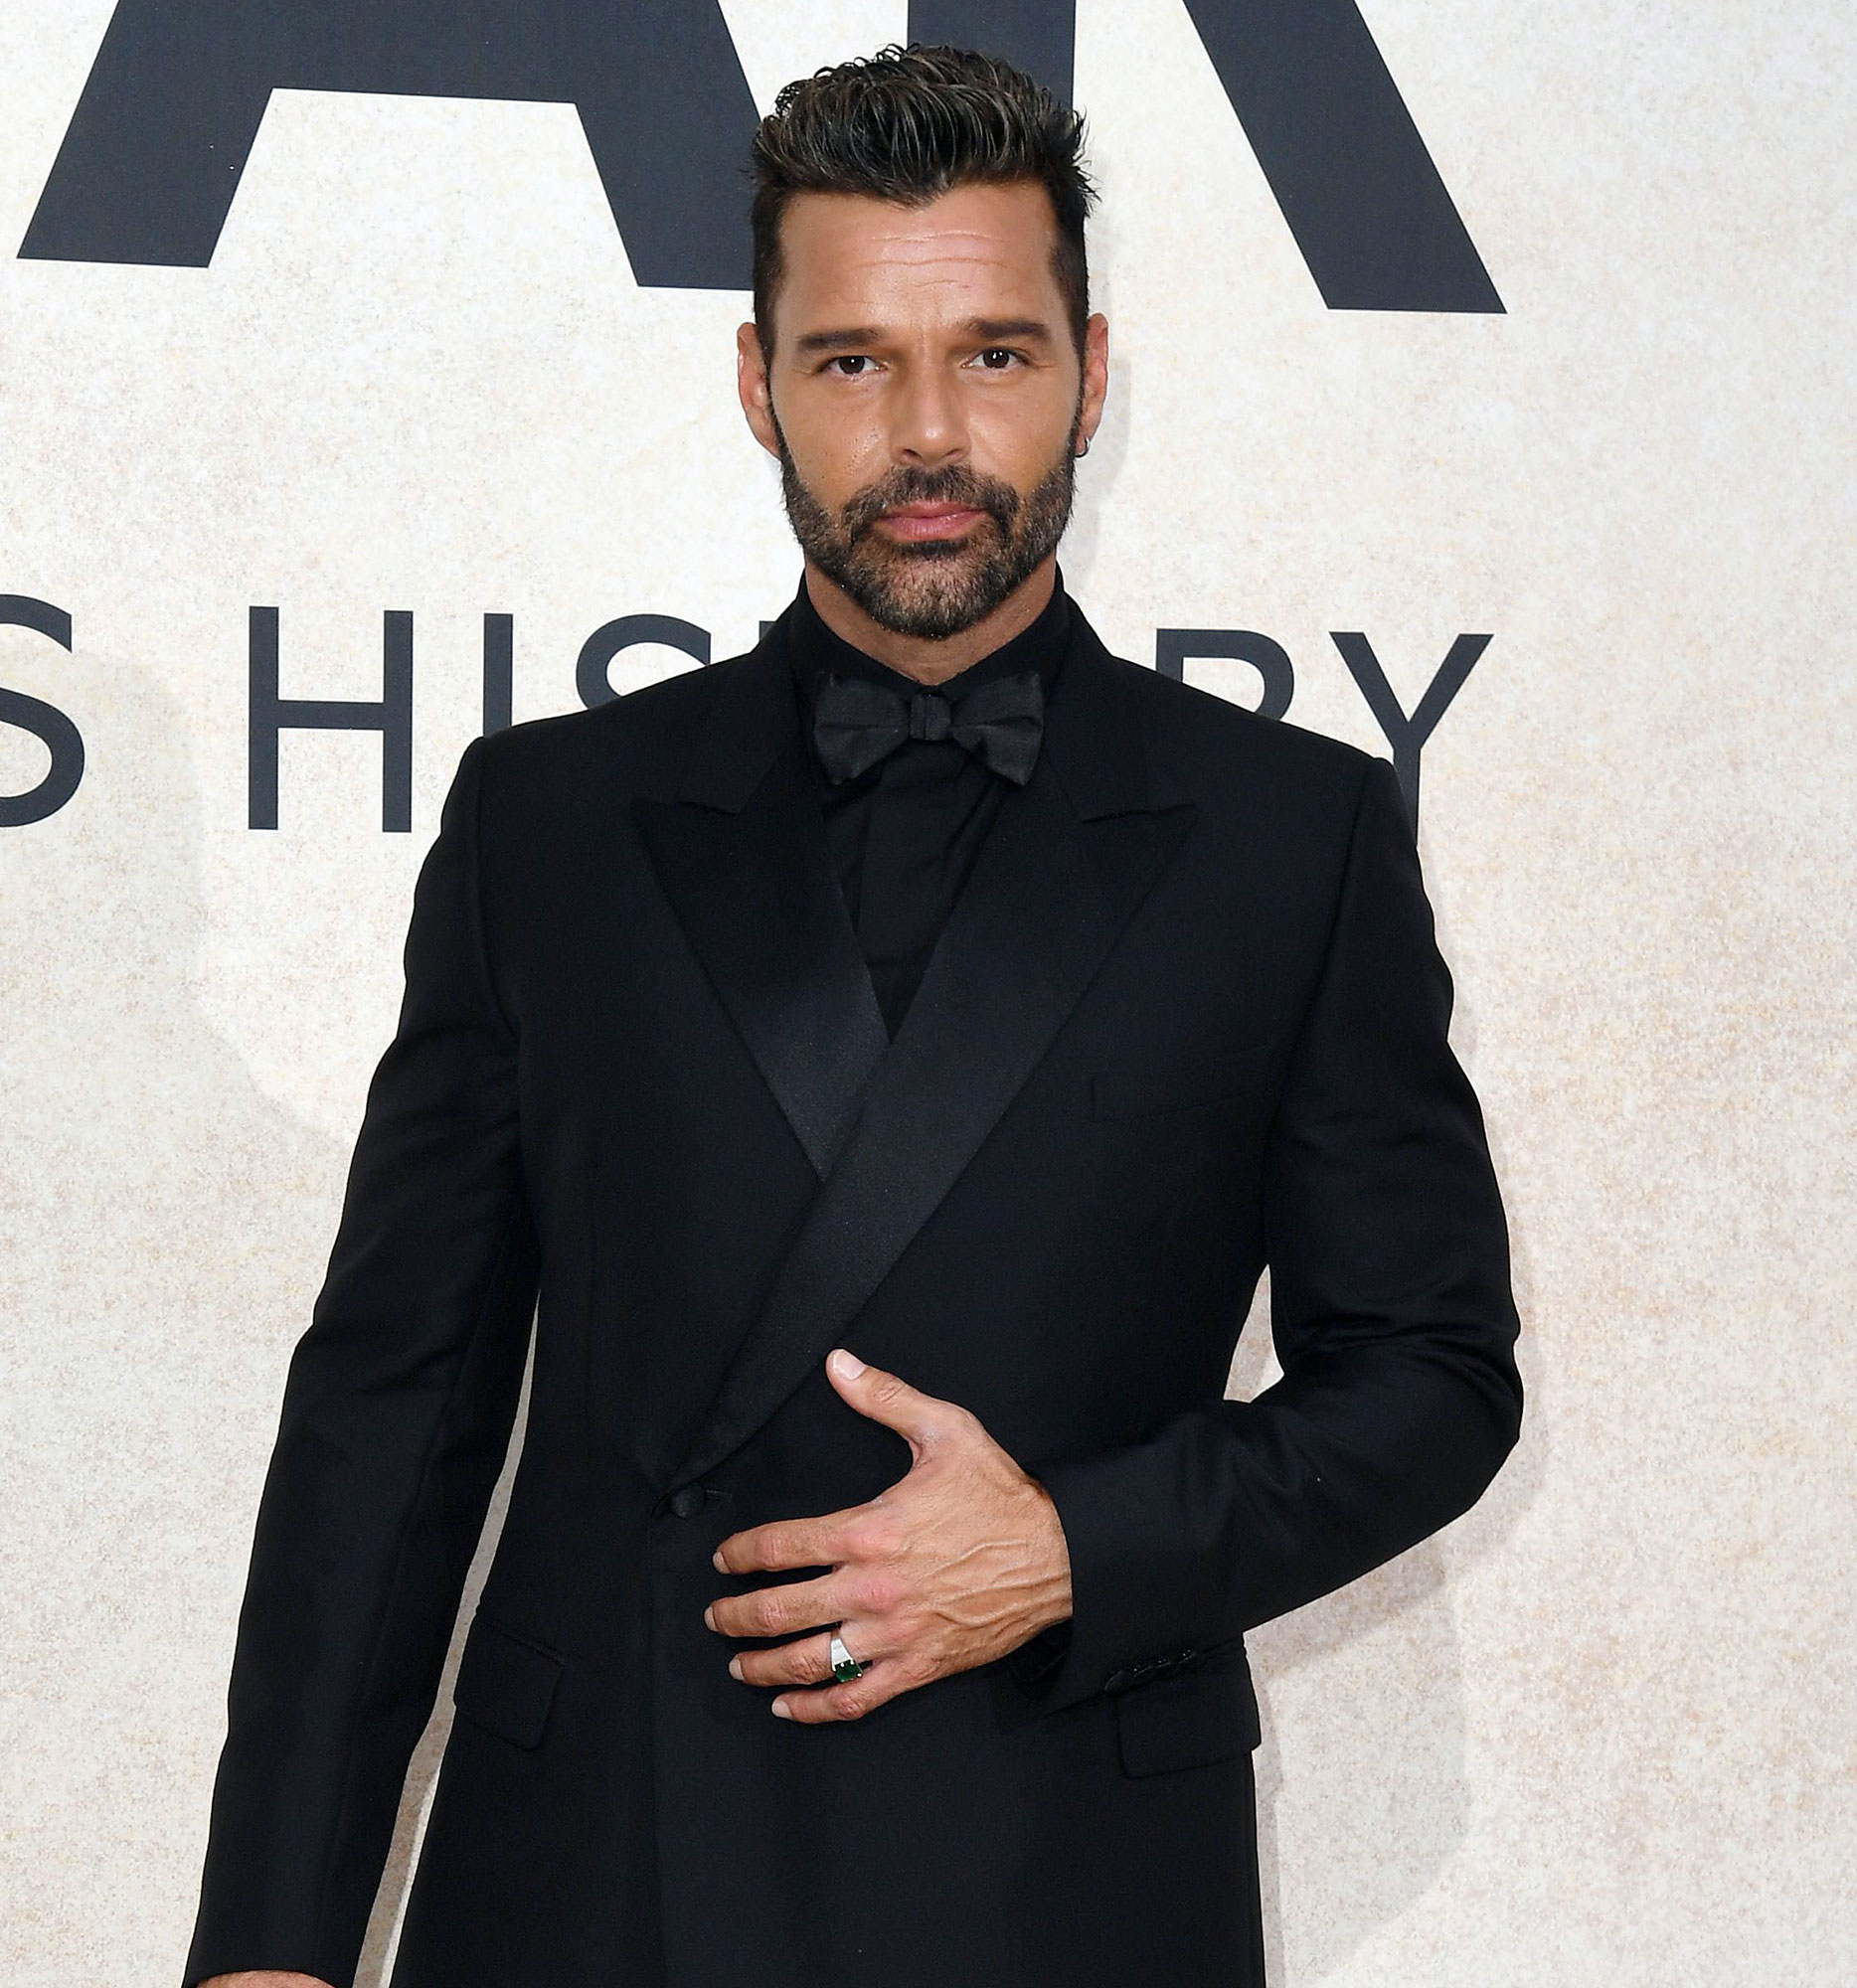 Ricky Martin Denies Alleged Sexual Relationship With Nephew photo